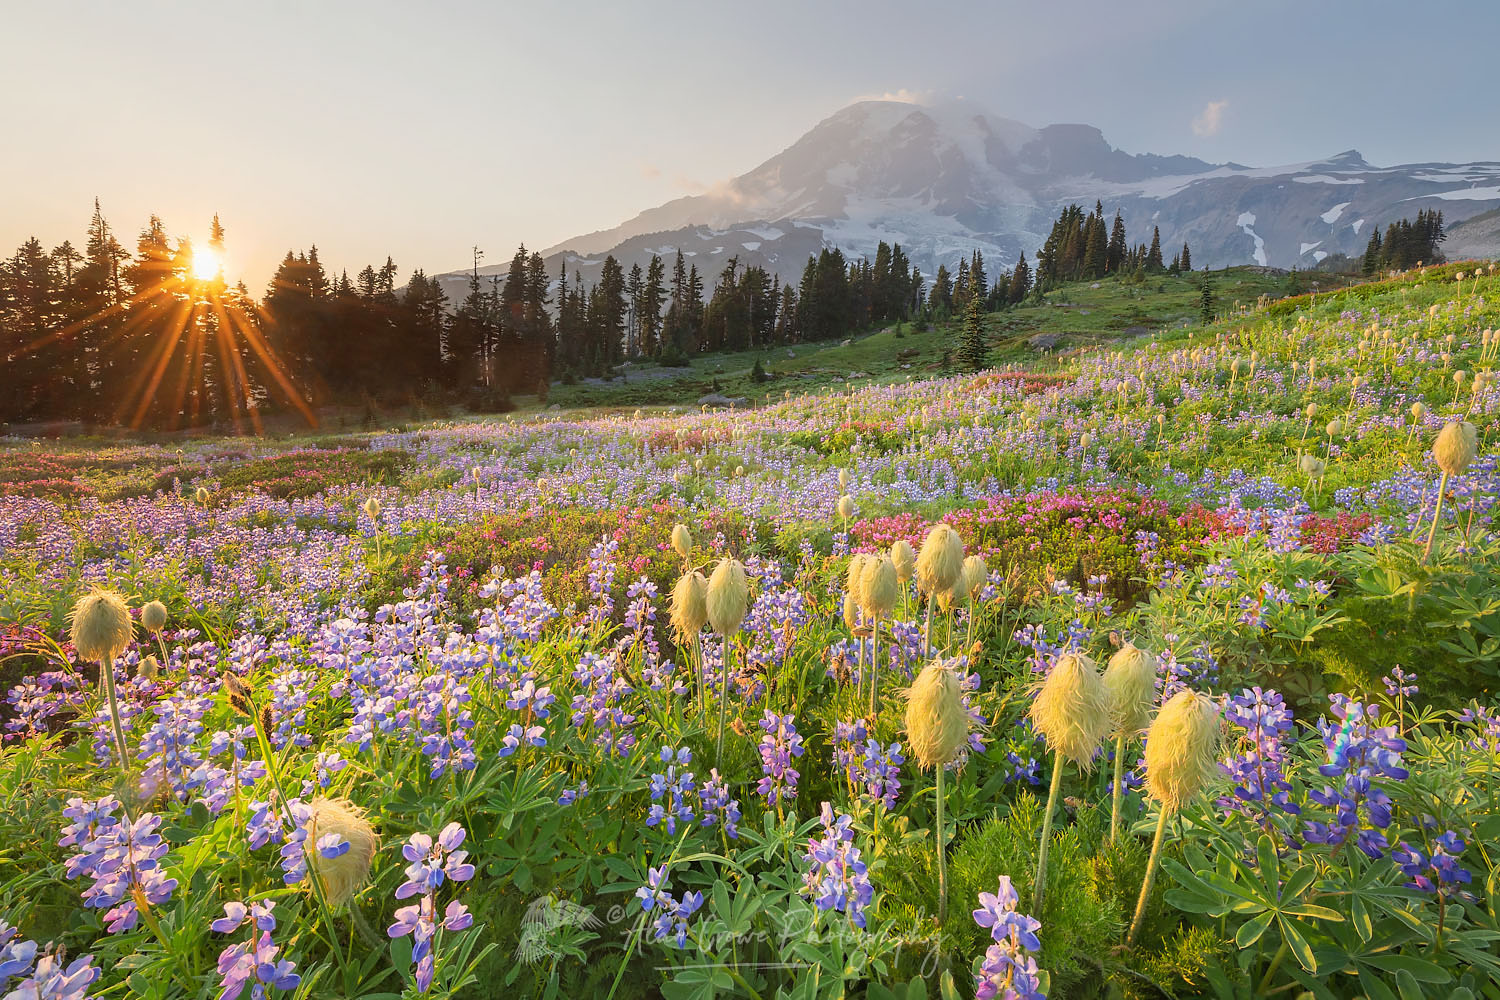 Sunset over Mount Rainier Paradise wildflower meadows. Containing a mixture of Western Anemone, Broadleaf Lupines, Pink Mountain Heather, and American Bistort. Mount Rainier National Park, Washington #73268b